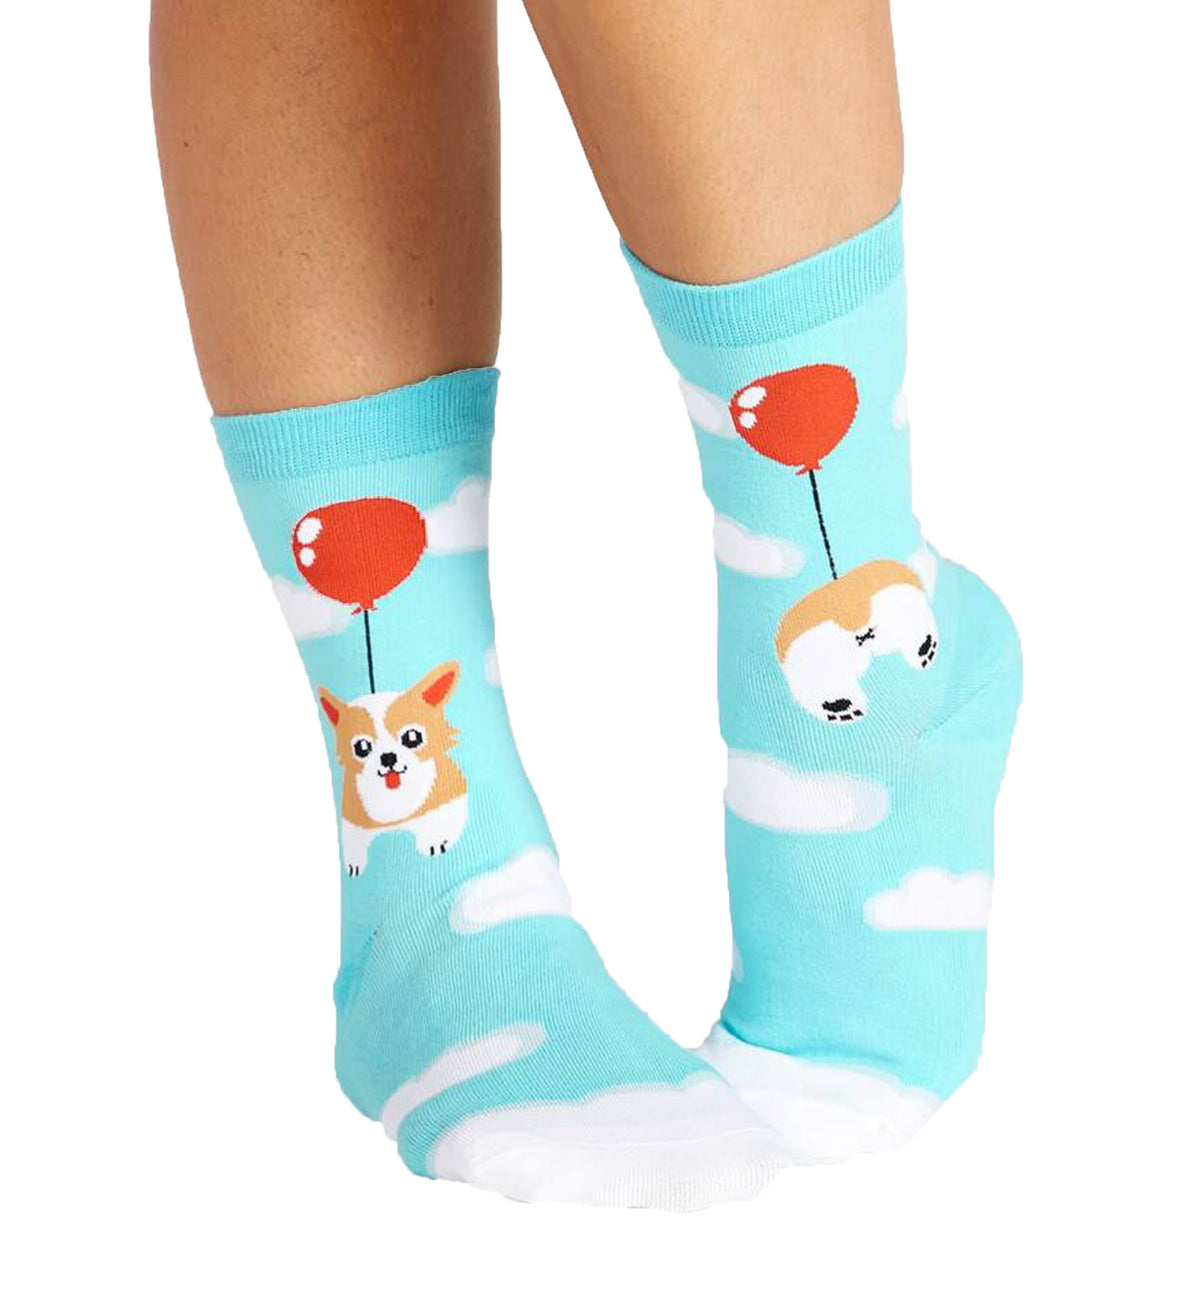 SOCK it to me Women&#39;s Crew Socks (w0178),Pup, Pup and Away - Pup Pup and Away,One Size